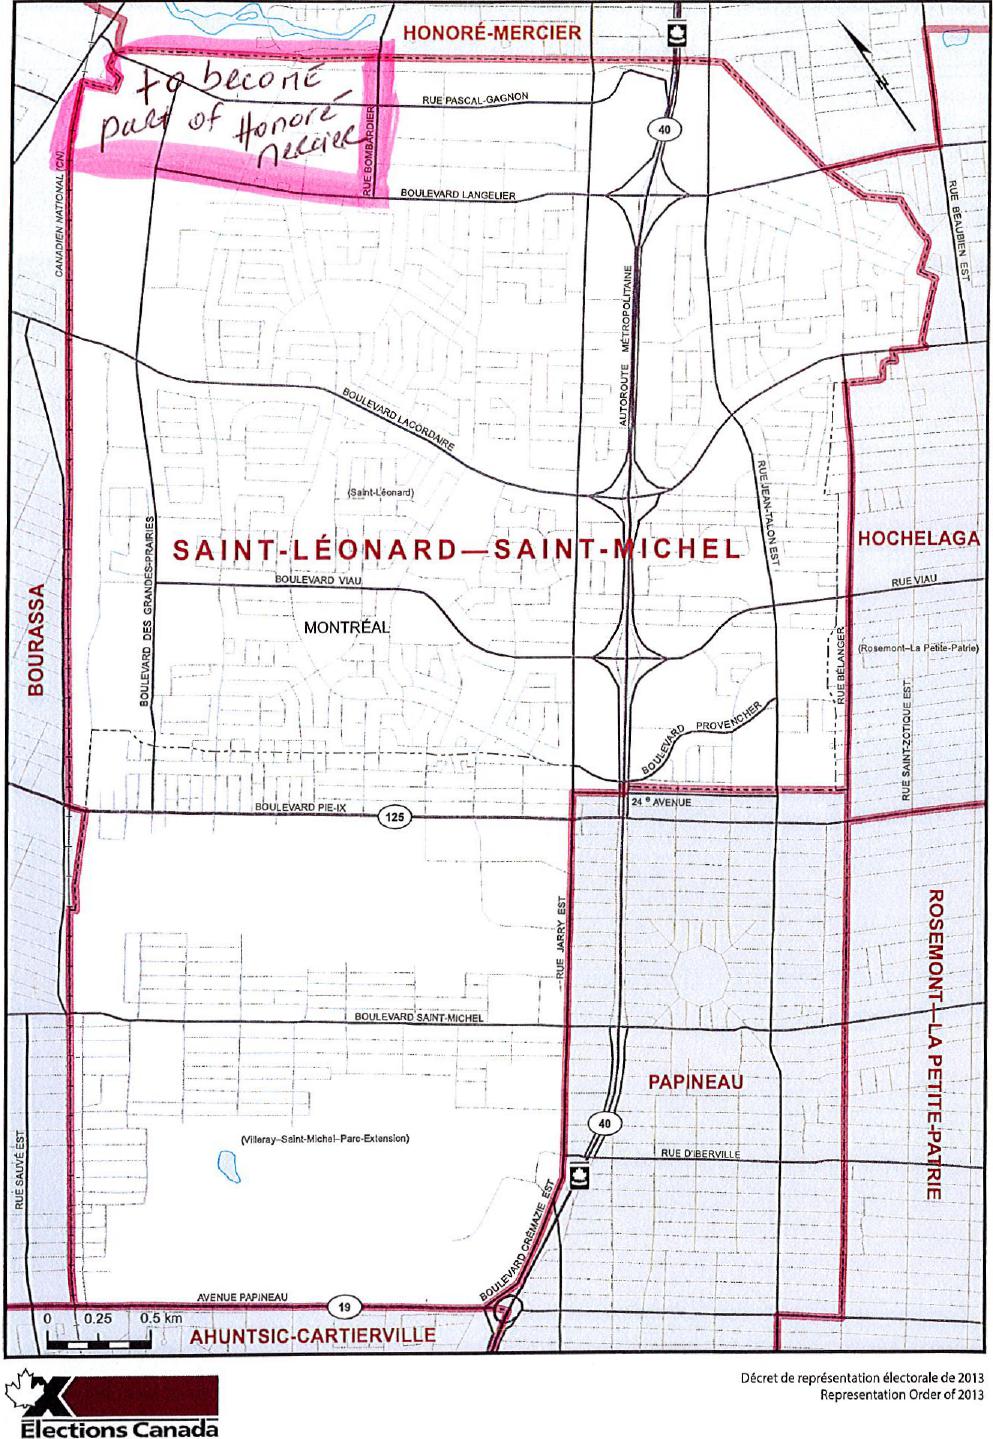 A map of electoral boundaries described above includes the title 'Saint-Leonard-Saint-Michel' in the center. At the top left a small rectangular portion is described by a thick pink line with the hand written note: 'to become part of Honore-Mercier'.